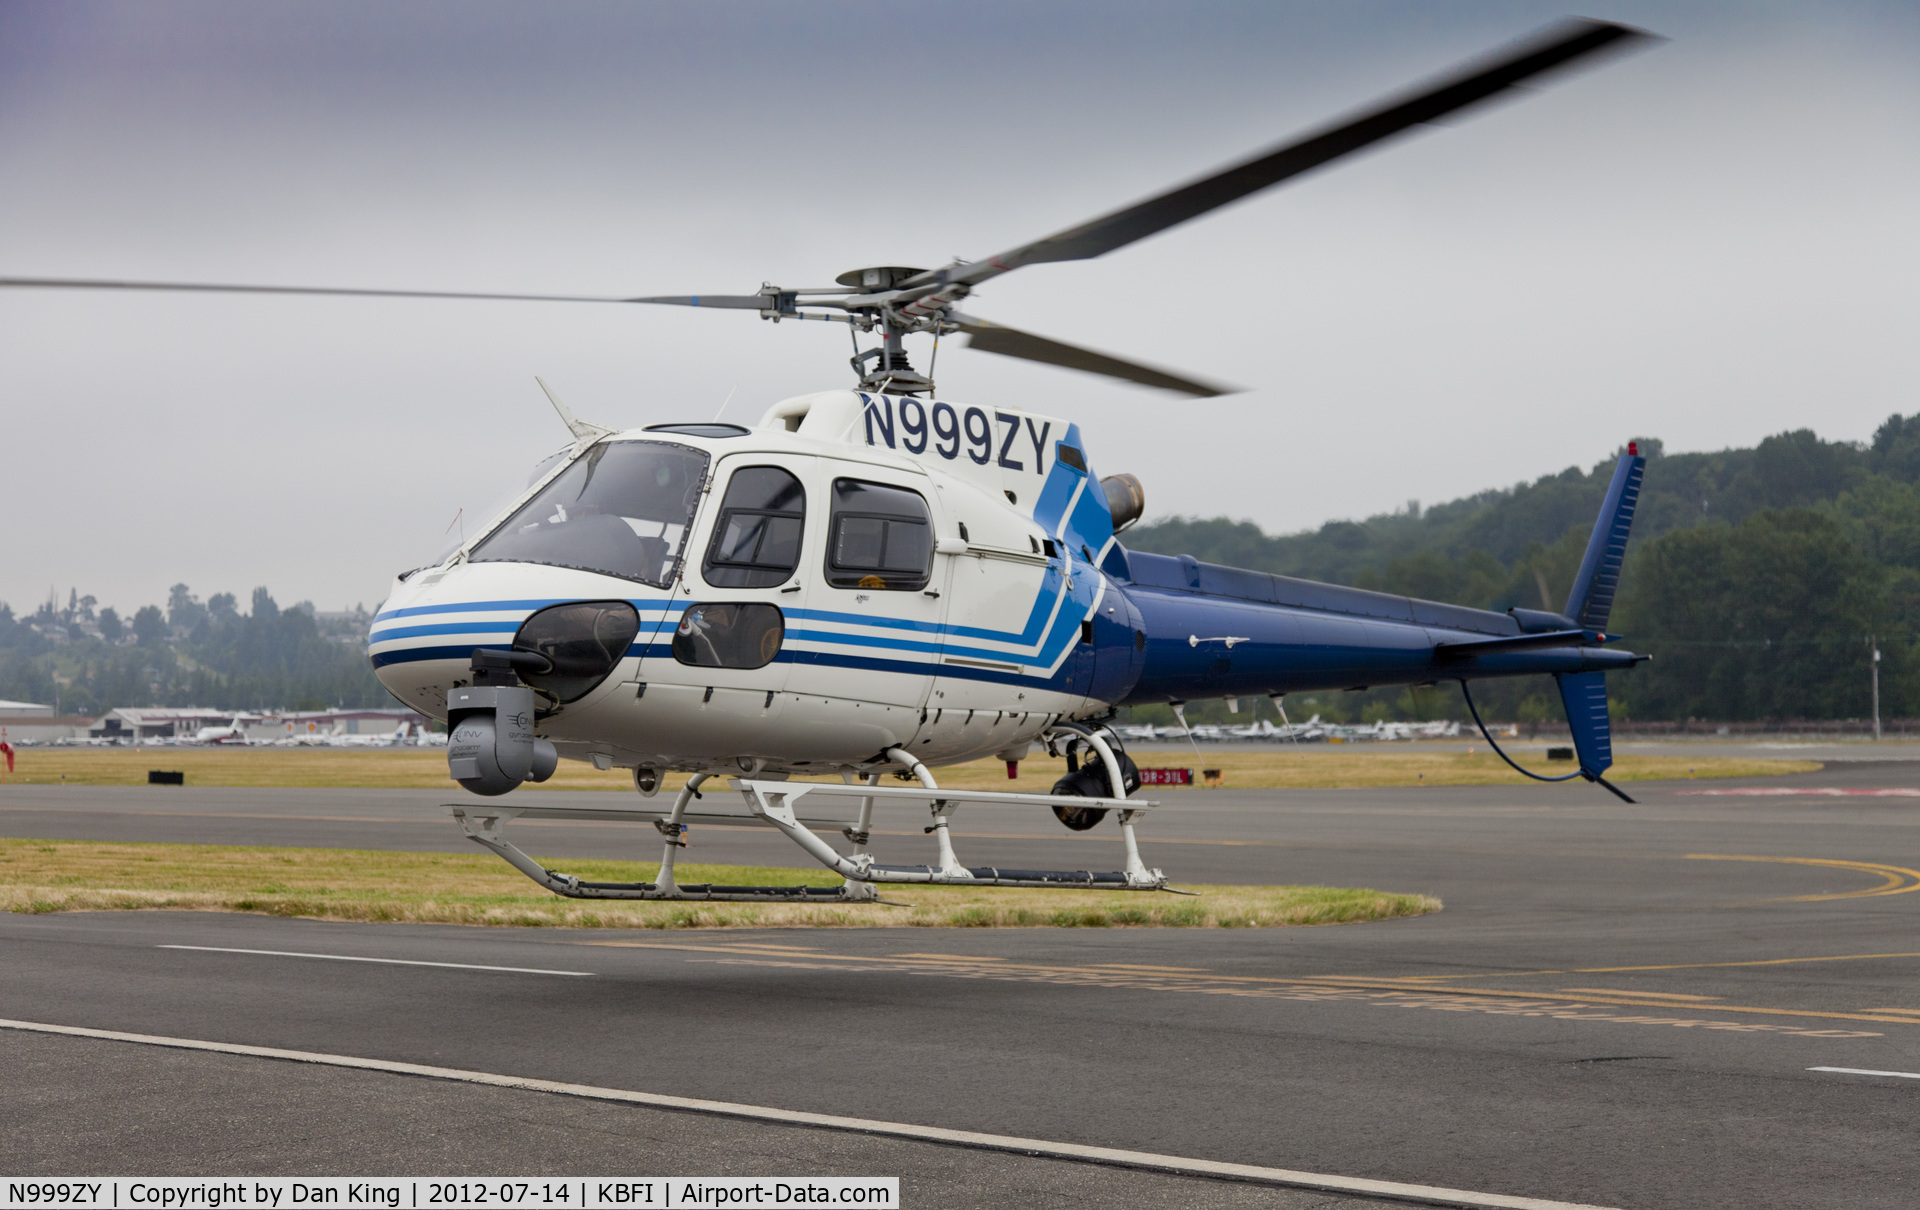 N999ZY, Eurocopter AS-350B-2 Ecureuil Ecureuil C/N 3538, The DEA is making a grand show coming in for a landing